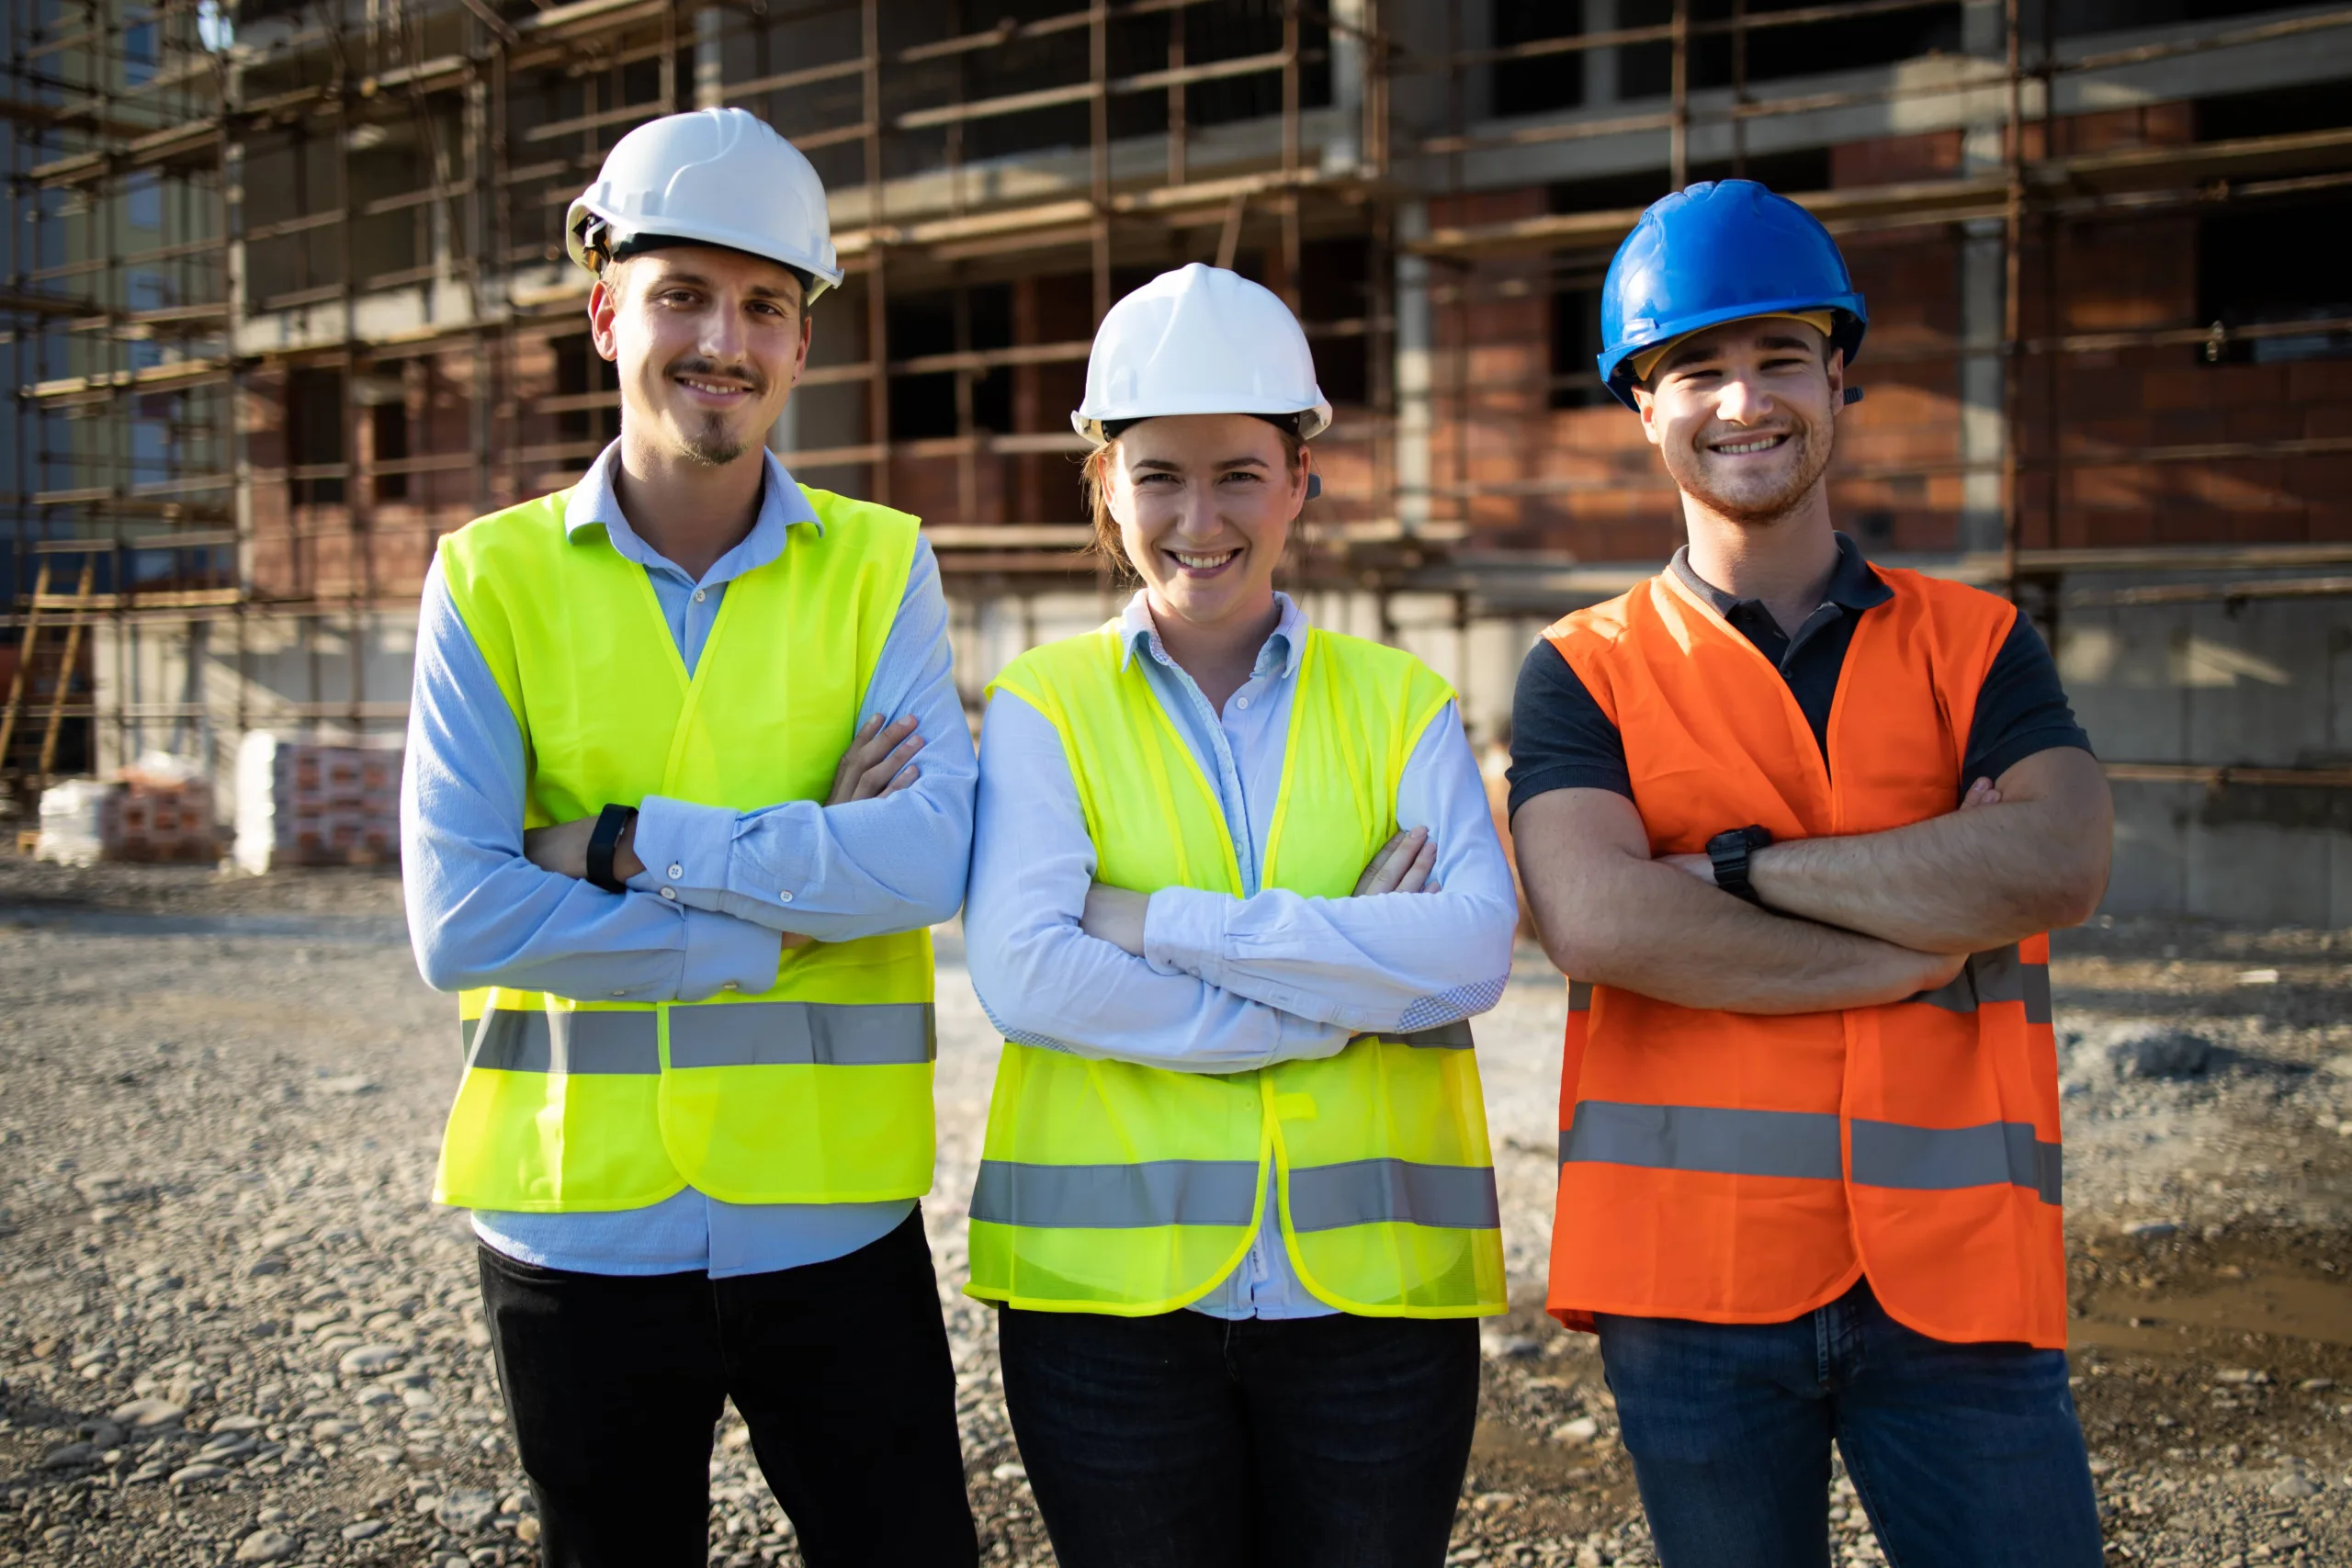 construction project managers